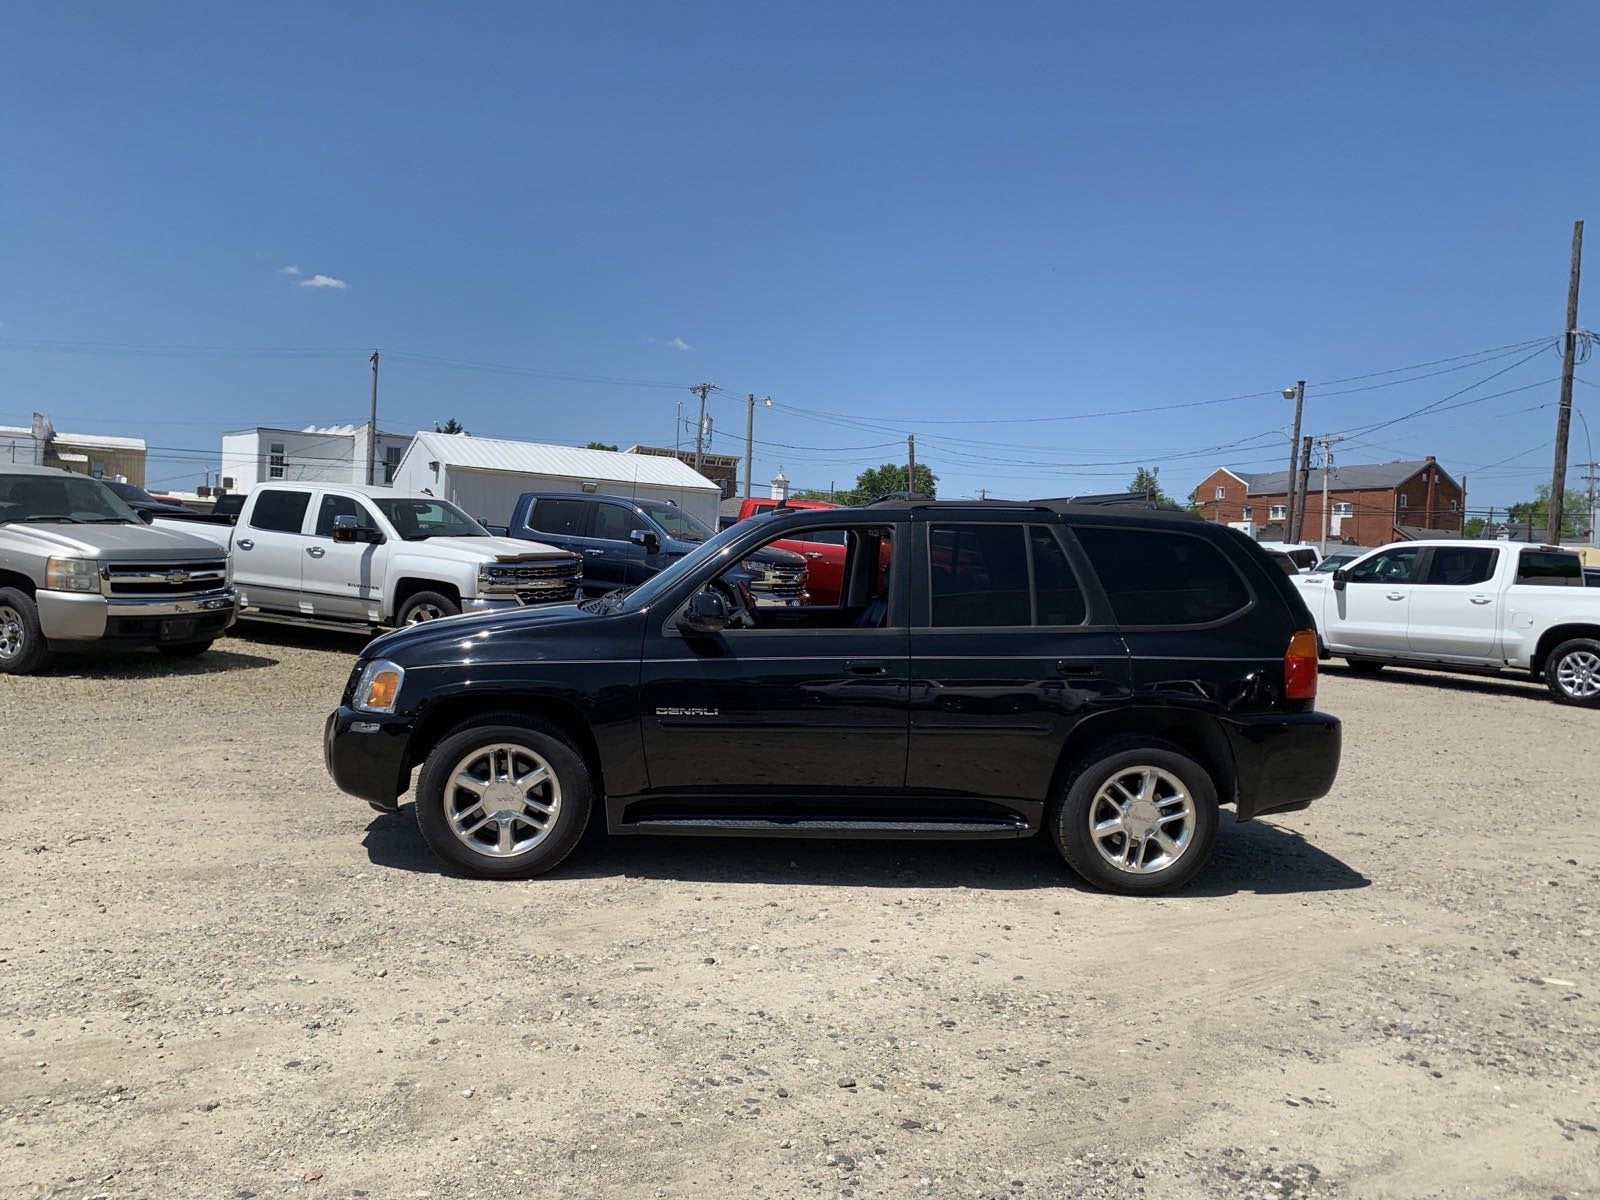 Used 2009 GMC Envoy Denali with VIN 1GKET53M392105937 for sale in Mechanicsburg, OH